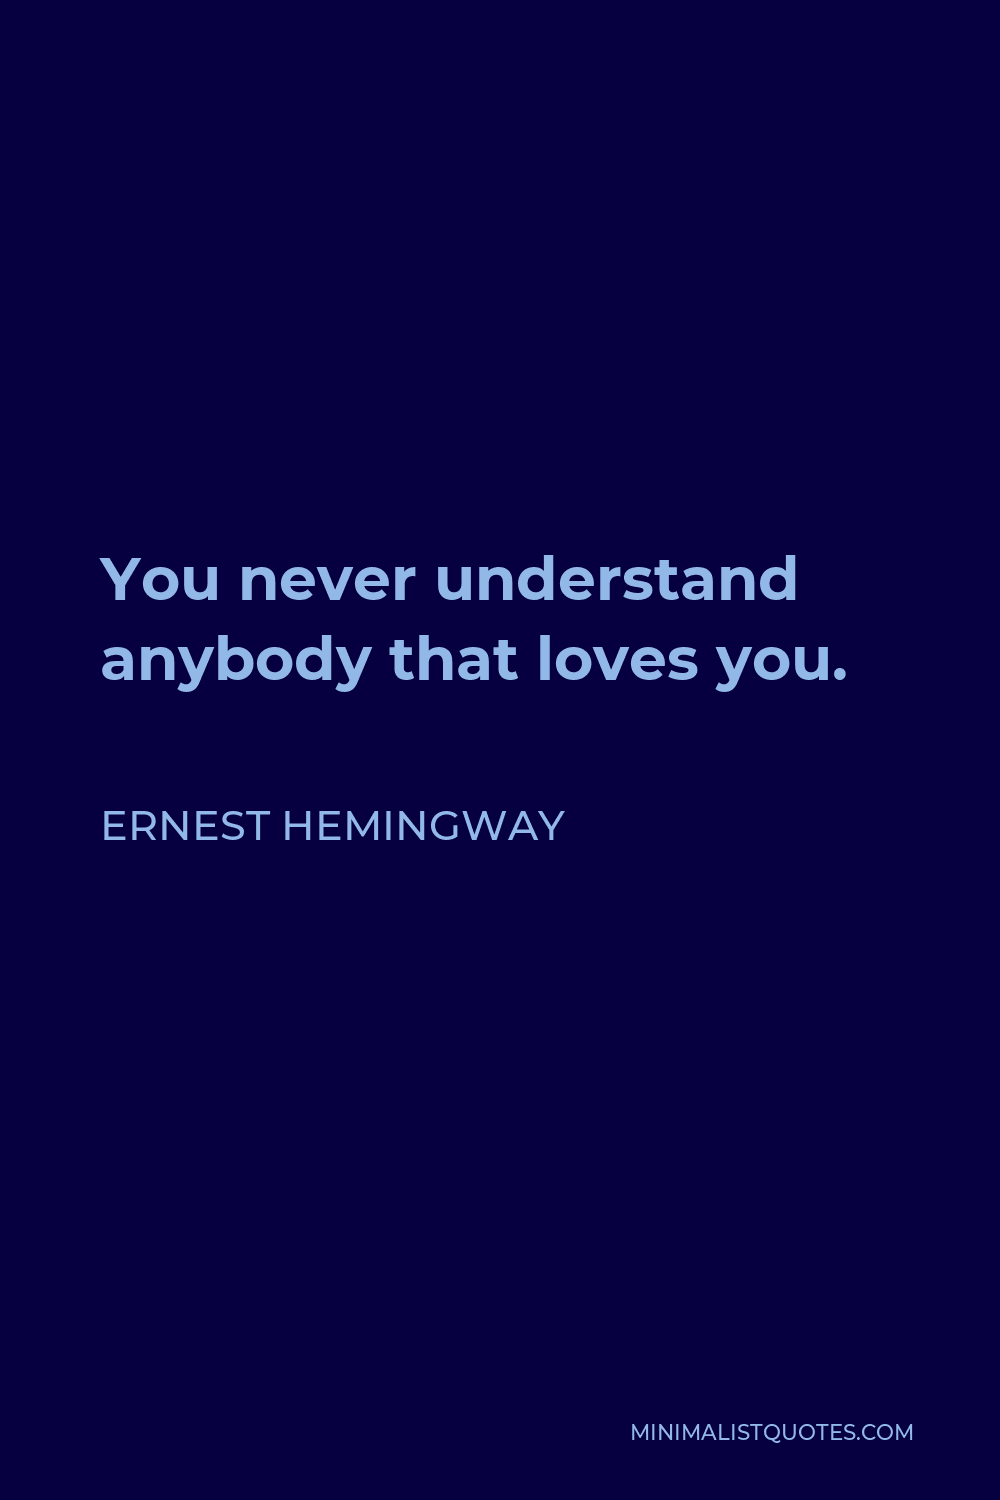 Ernest Hemingway Quote - You never understand anybody that loves you.